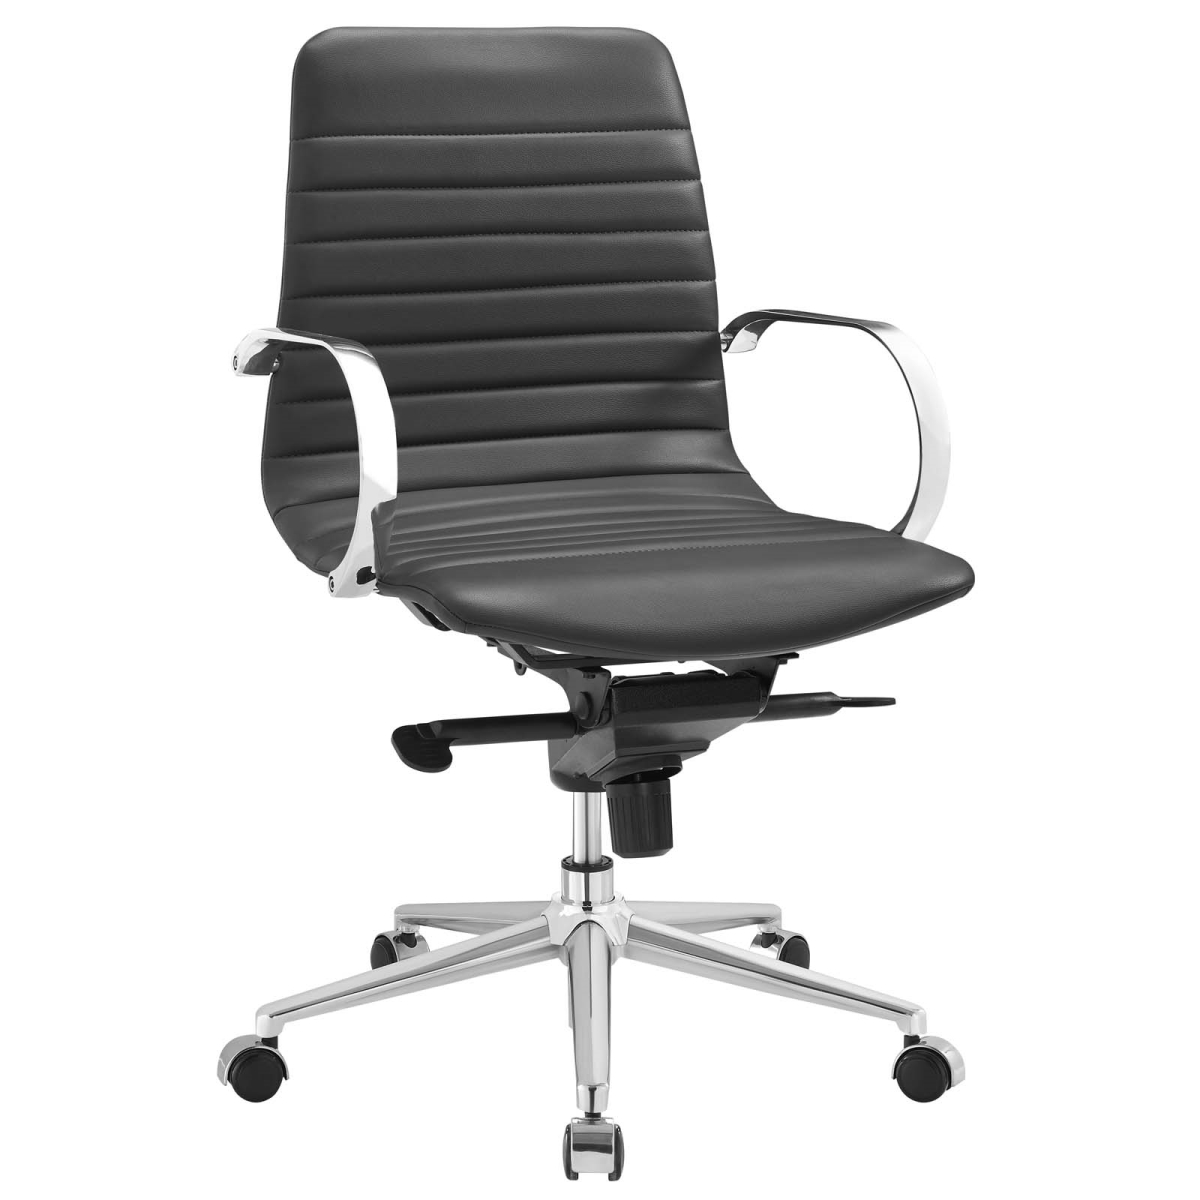 Eei-2859-gry Groove Ribbed Back Office Chair - Gray, 37 - 39 X 23 X 24 In.